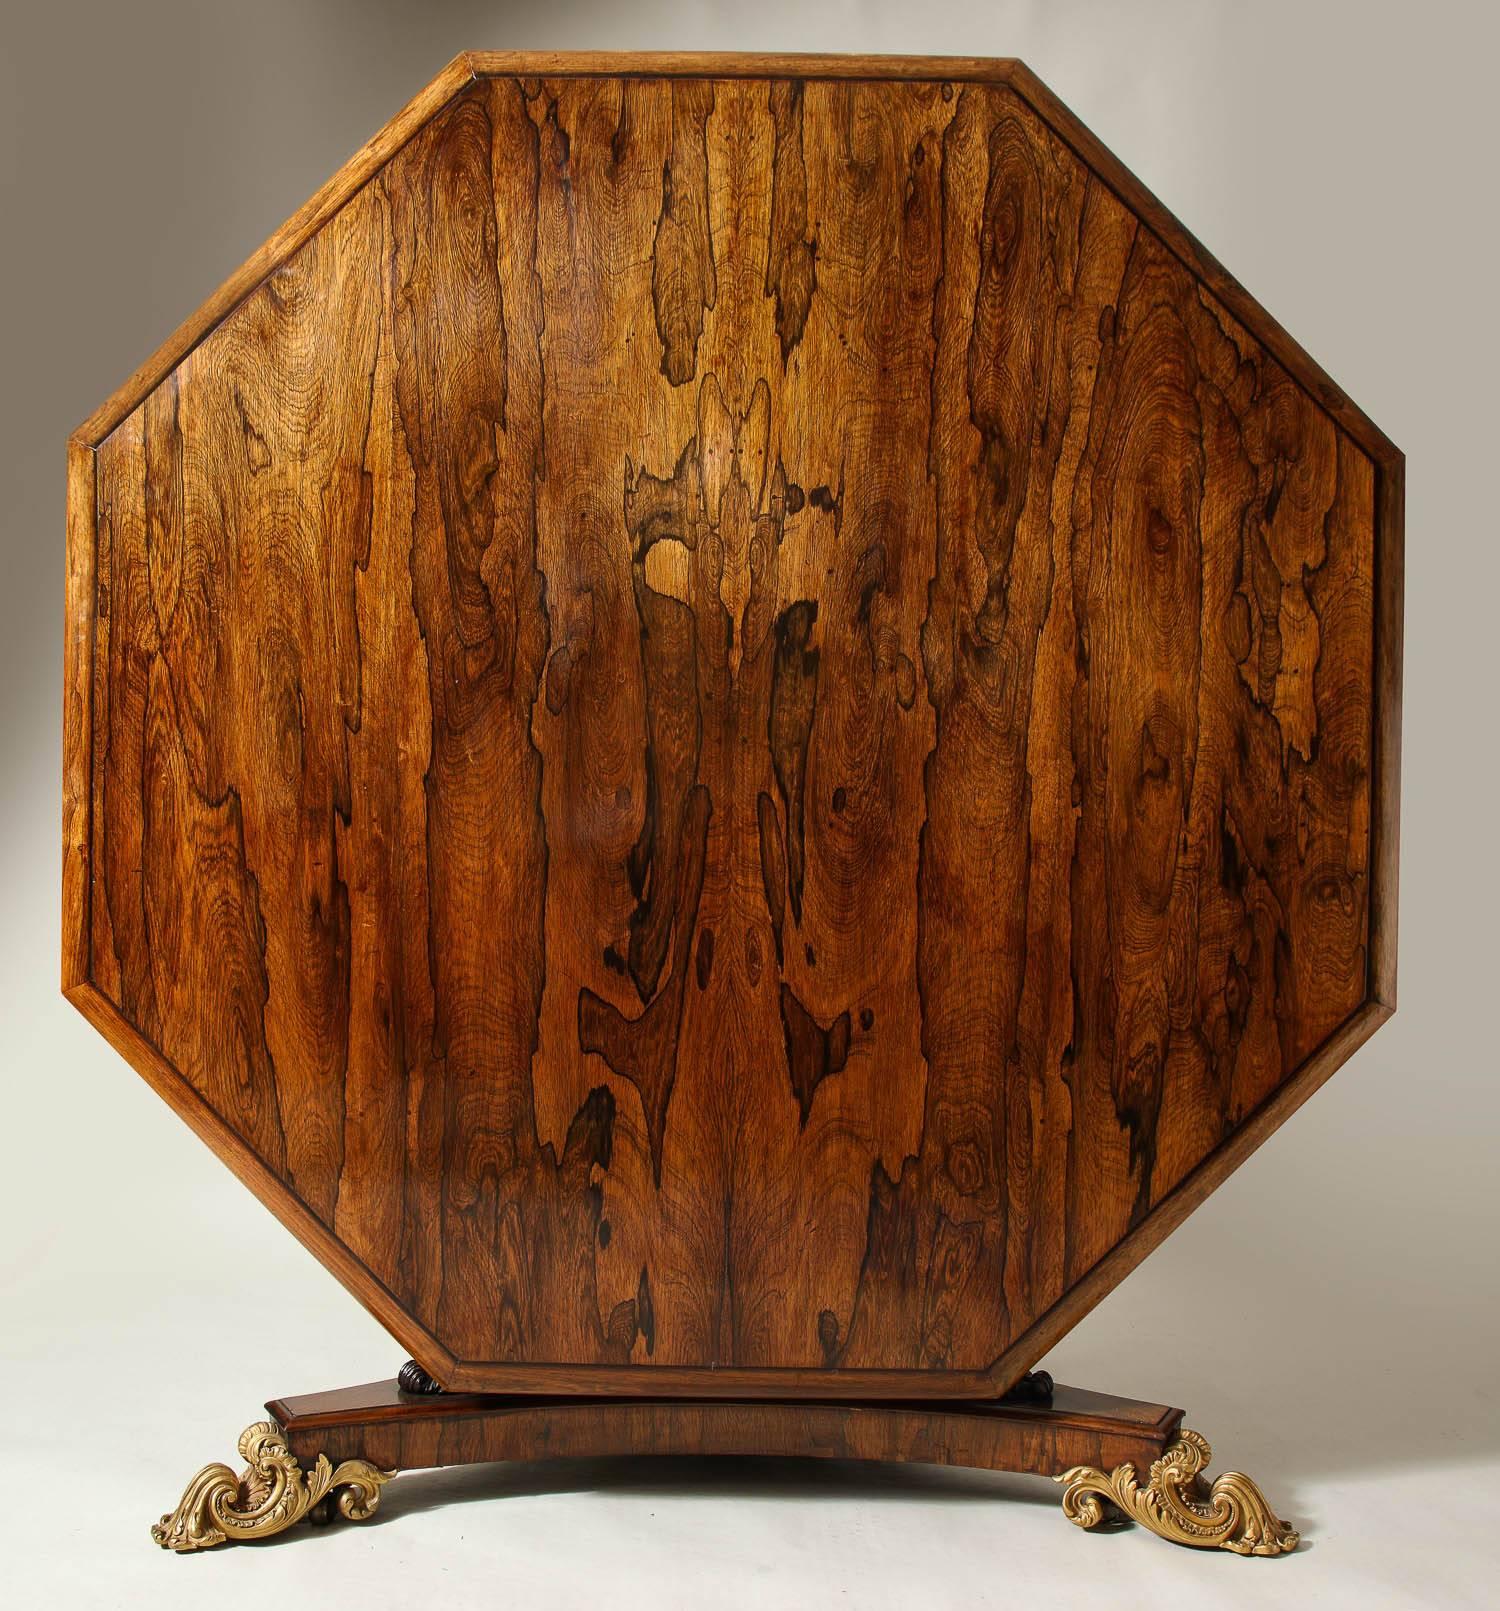 A very fine Regency rosewood centre table by Miles and Edwards, having an octagonal top with a molded edge over a parcel-gilt and carved rosewood pedestal ending in a tripartite base with gilt bronze acanthus leaf feet, the whole possessing vivid